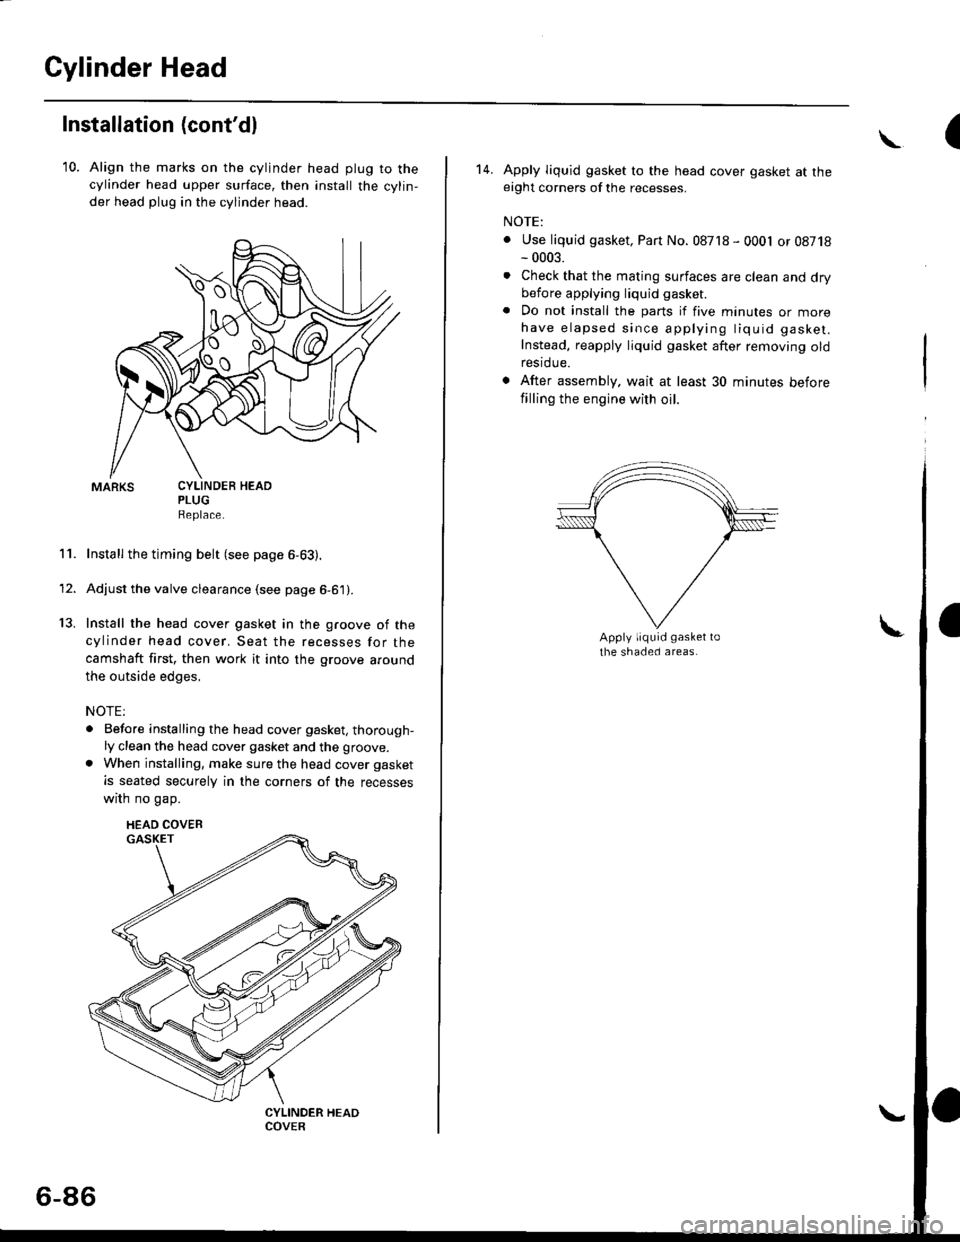 HONDA CIVIC 1999 6.G Service Manual Cylinder Head
Installation (contdl
10. Align the marks on the cylinder head plug to thecylinder head upper surface, then install the cylin,
der head plug in the cylinder head.
PLUGReplace.
Install th